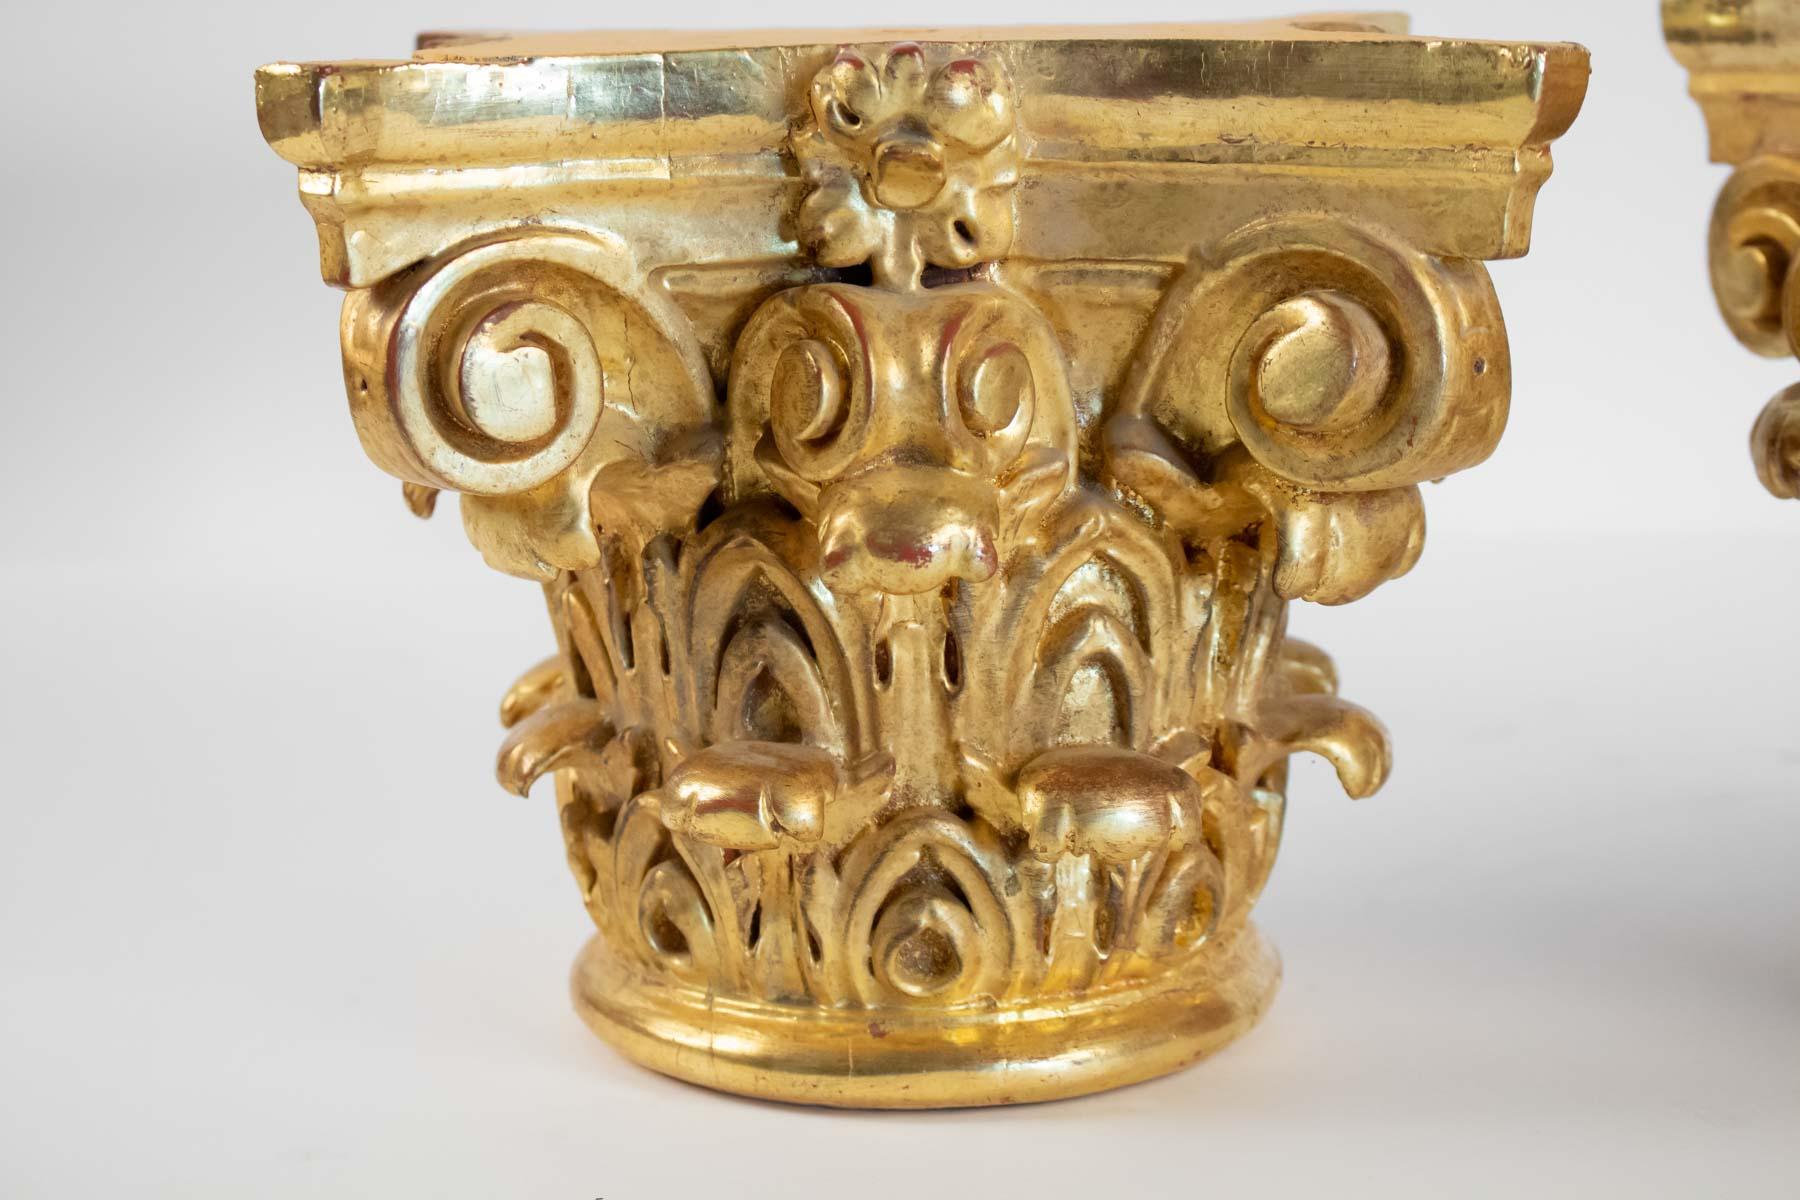 Pair of column tops carved and gilded, 20th century
Measures: H 20cm, W 22cm.